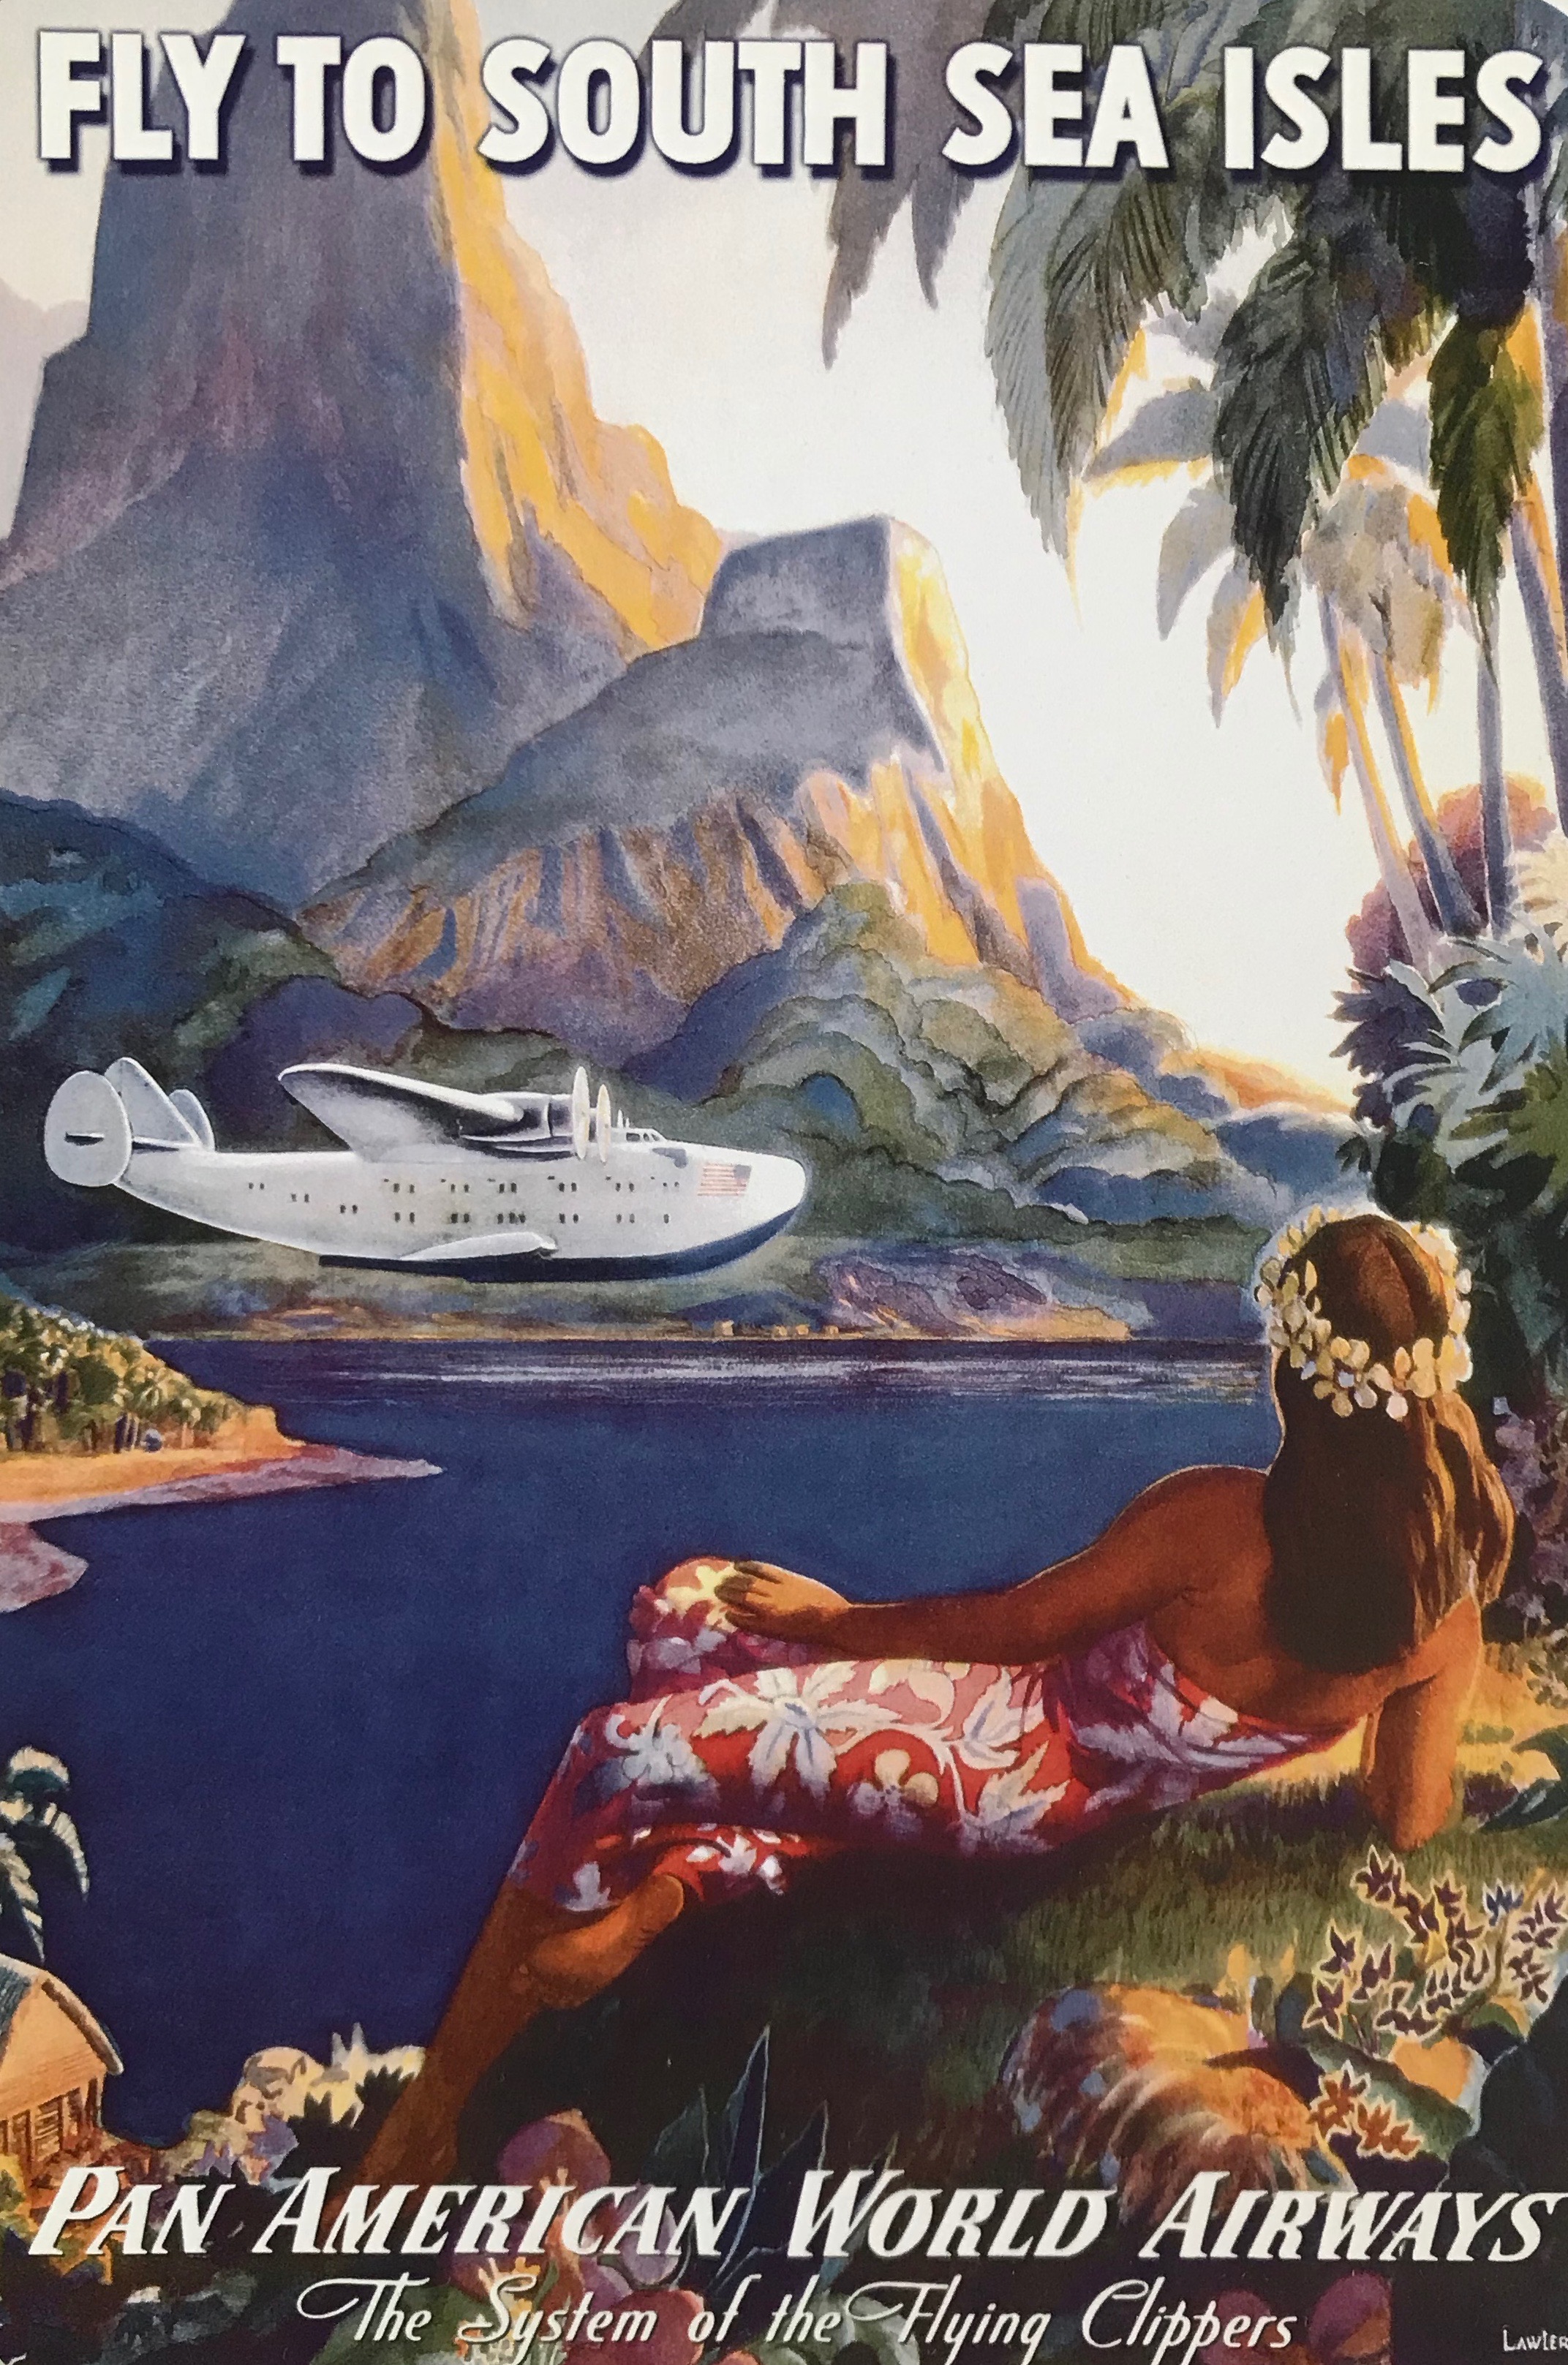 TX35 Vintage 1940’s HAWAII By Clipper Travel Poster Re-Print A1/A2/A3/A4 